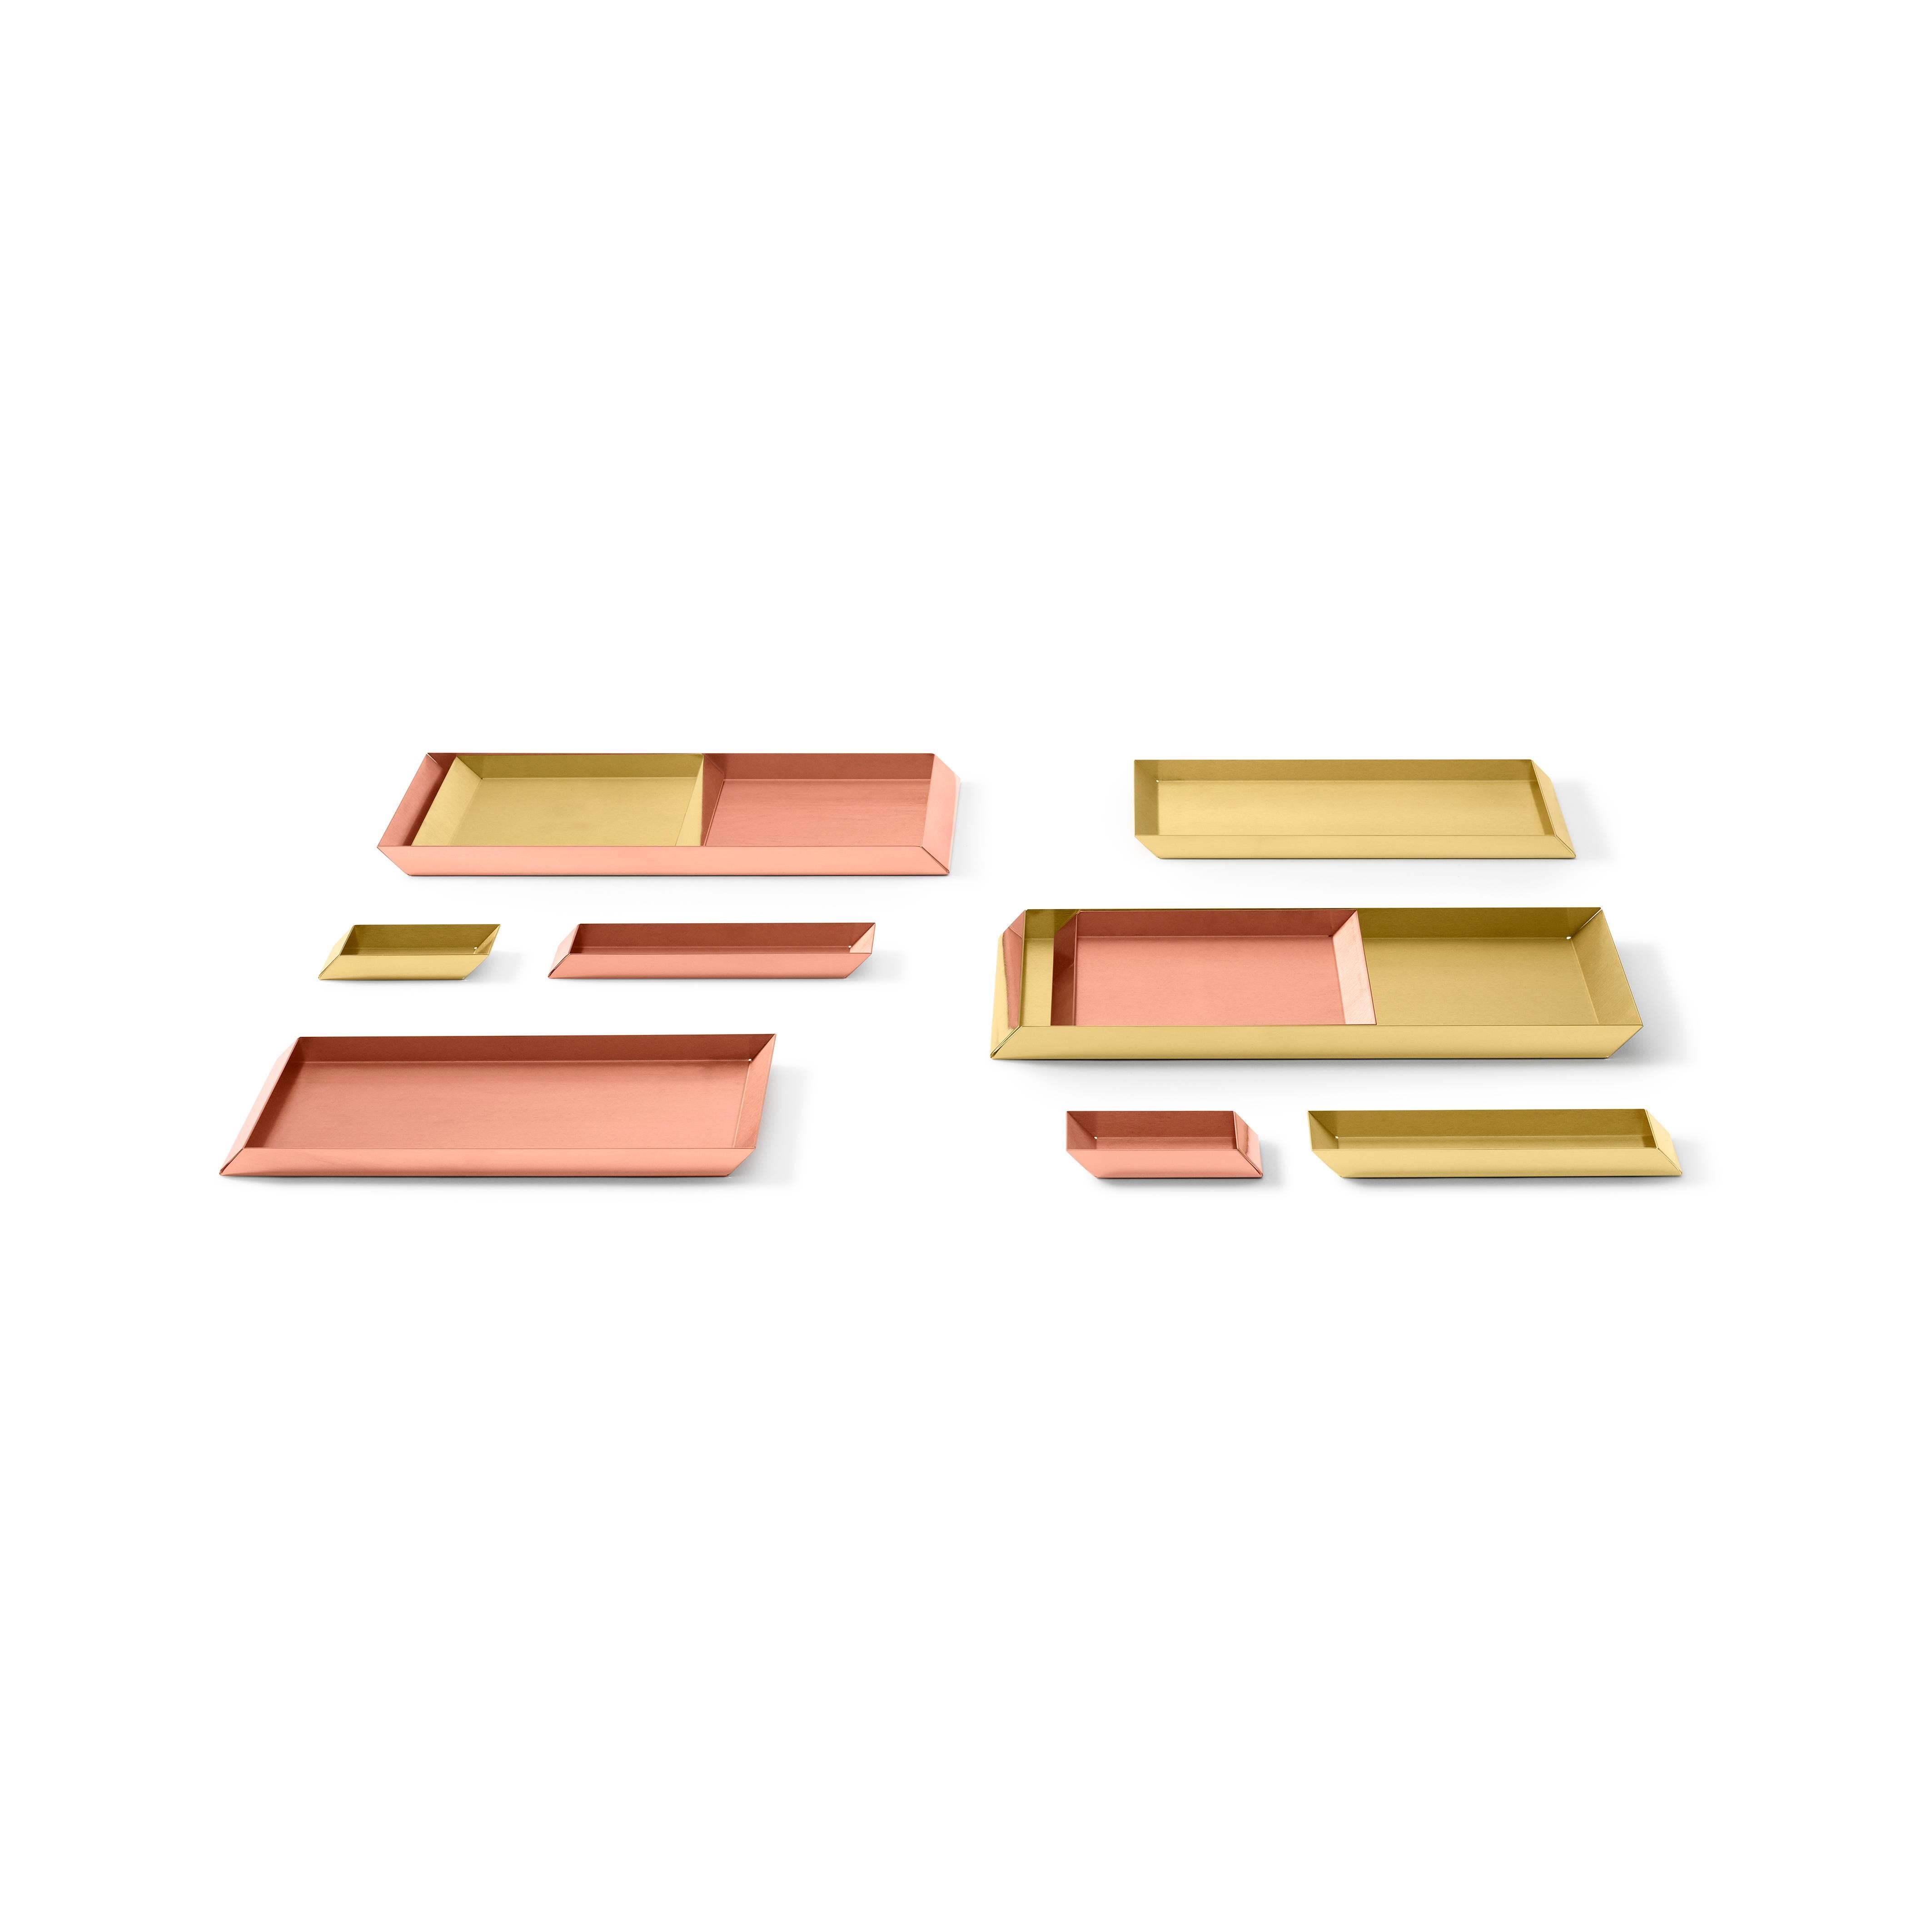 Trays in brass. The compositional scheme of this family of small trays is the axonometric isometric projection of two parallelepipeds which creates a three-dimensional optical effect implemented by inclined edges and by contrasting metal finishes.